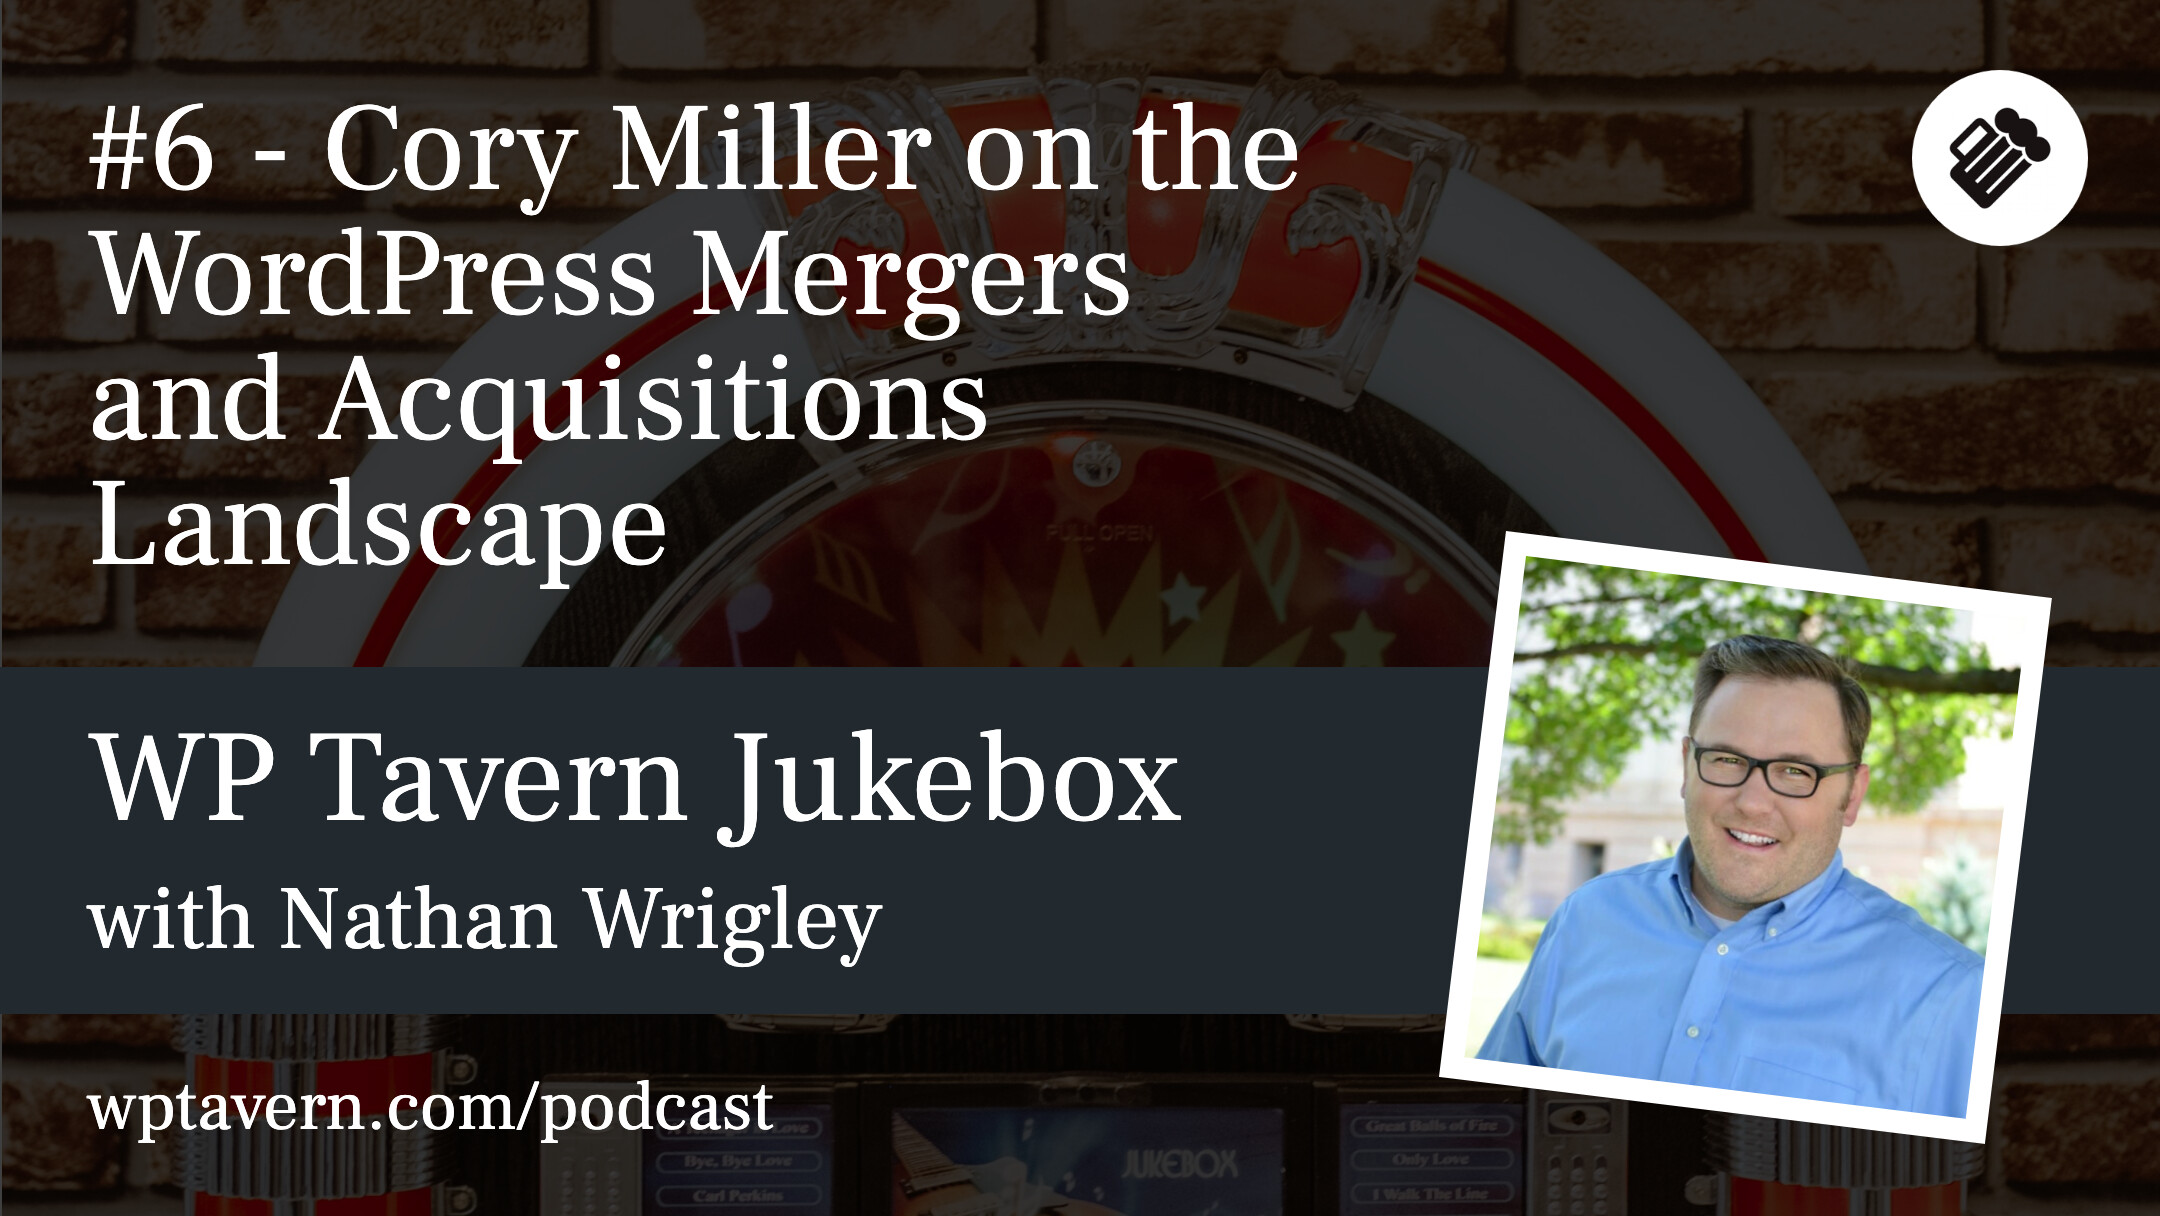 #6 – Cory Miller on the WordPress Mergers and Acquisitions Landscape